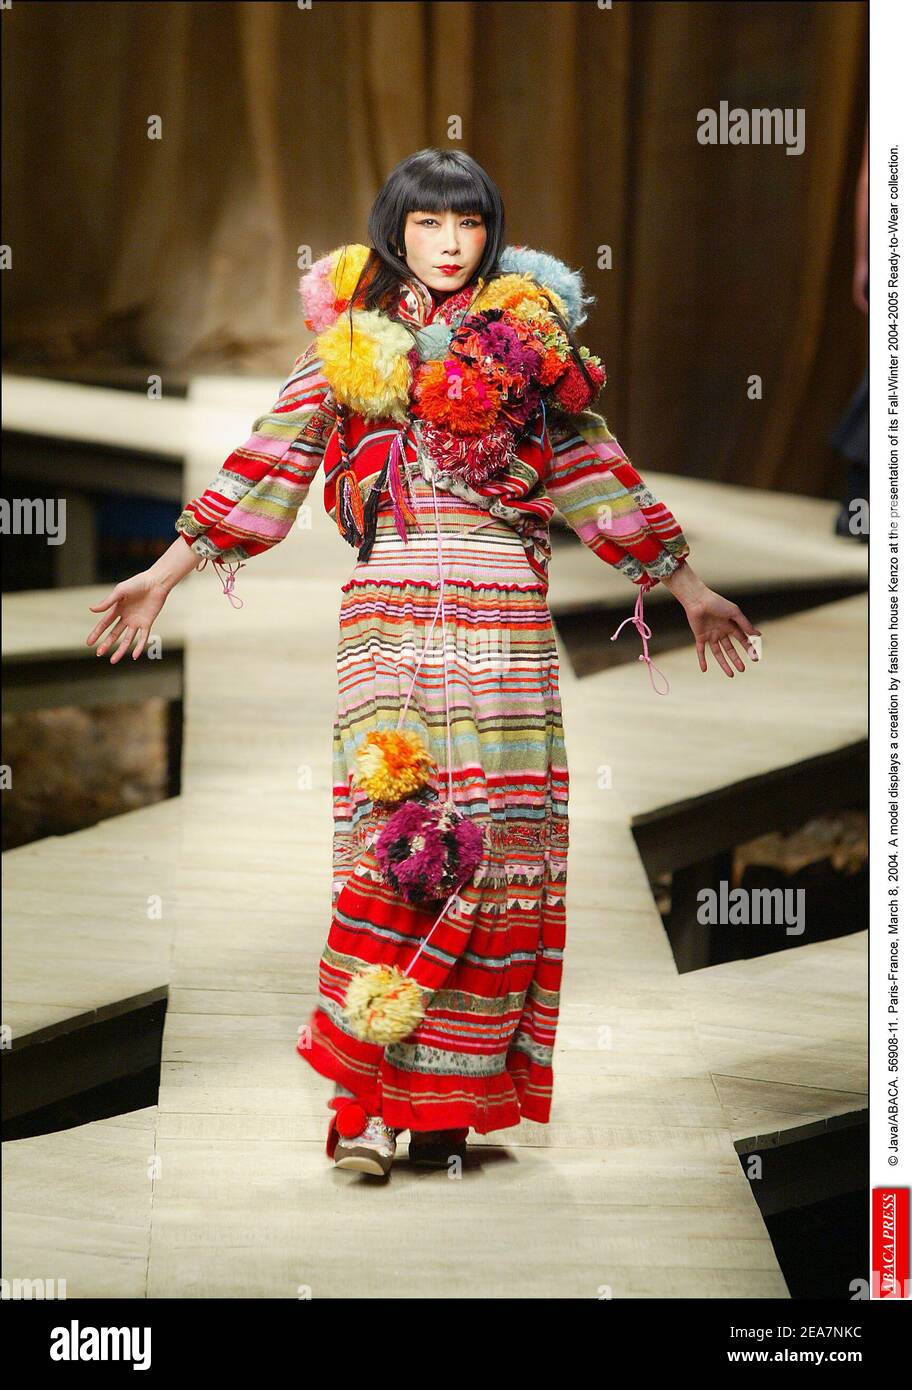 © Java/ABACA. 56908-11. Paris-France, March 8, 2004. A model displays a creation by fashion house Kenzo at the presentation of its Fall-Winter 2004-2005 Ready-to-Wear collection. Stock Photo